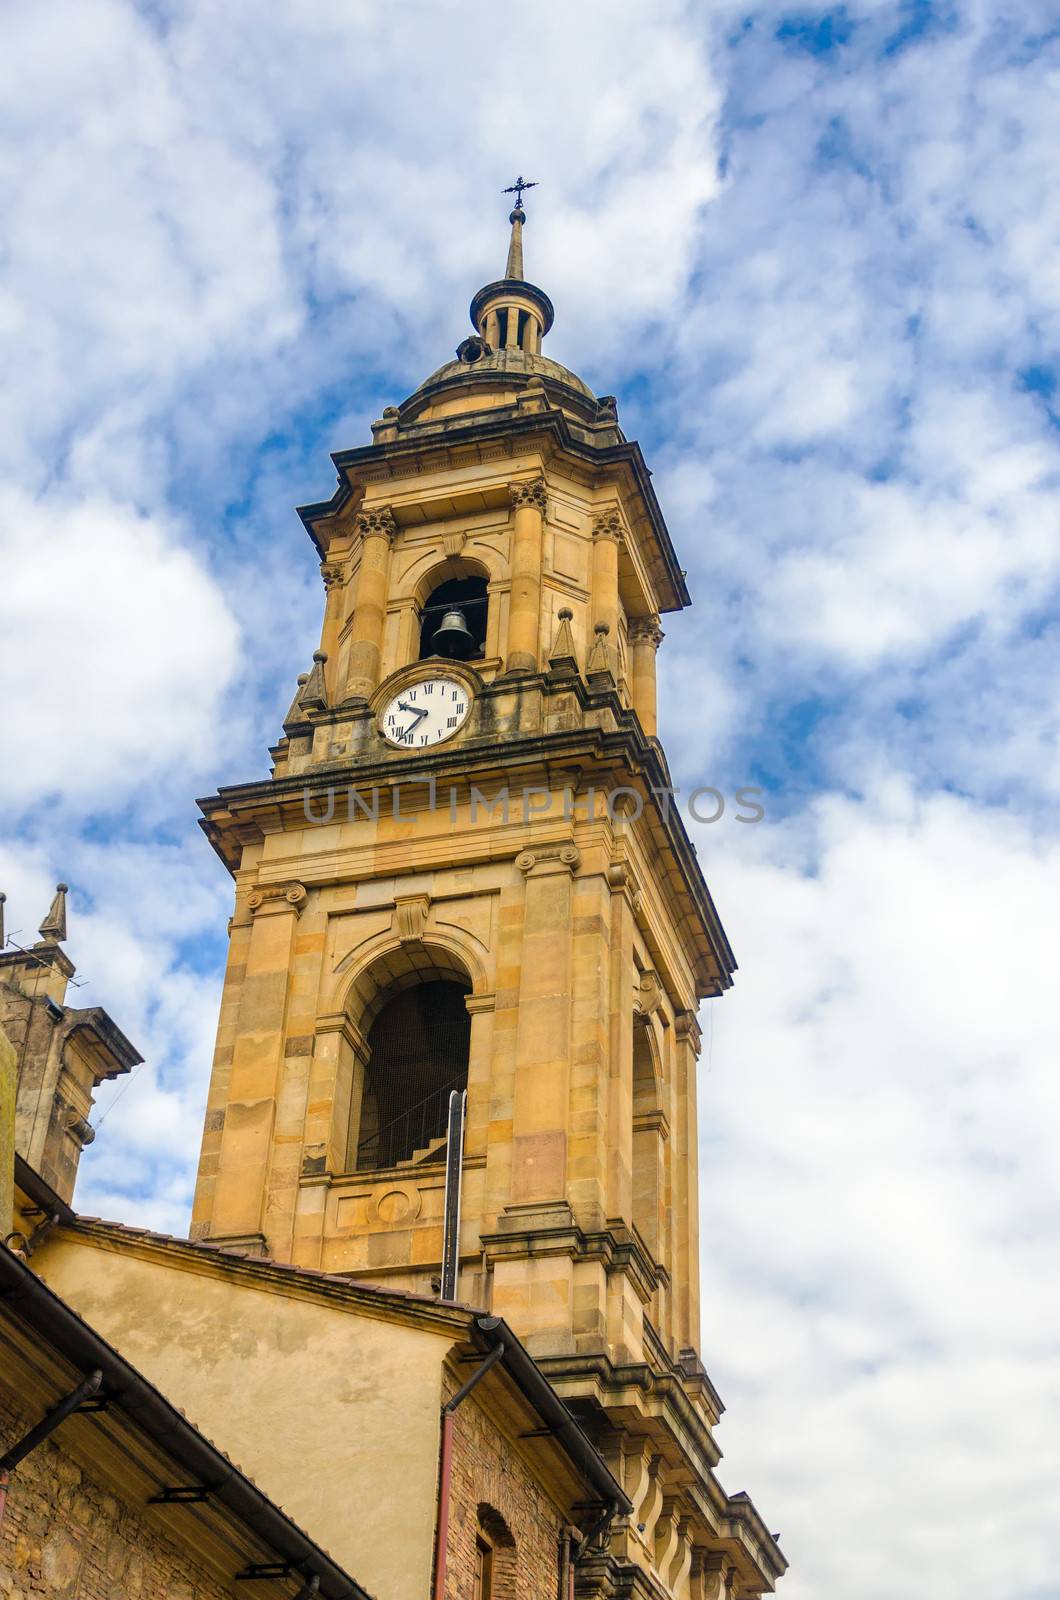 Spire of the cathedral in the Plaza de Bolivar in Bogota, Colombia